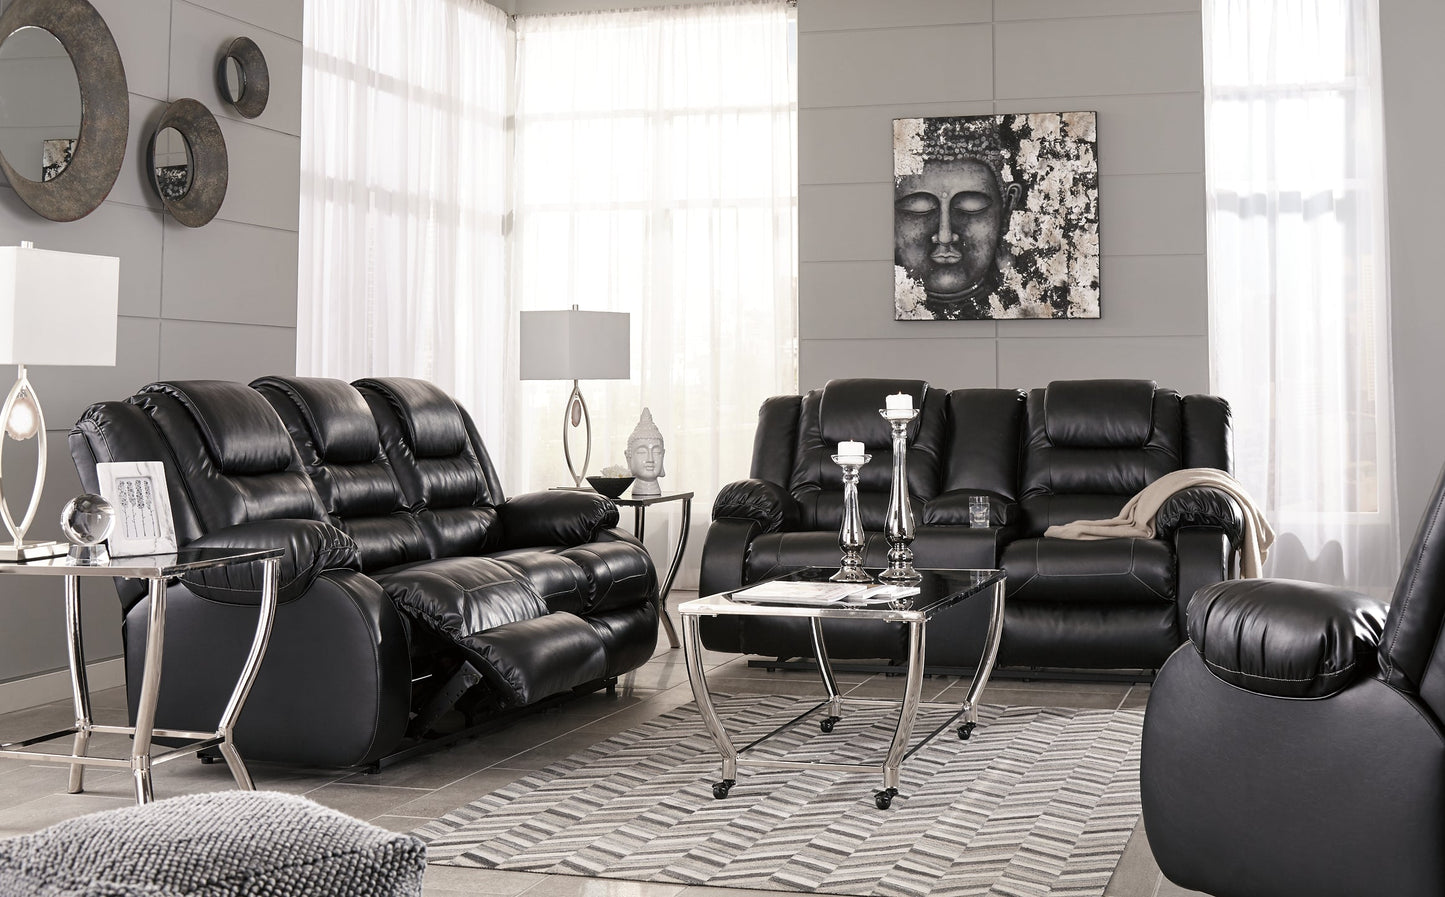 Vacherie Sofa, Loveseat and Recliner at Walker Mattress and Furniture Locations in Cedar Park and Belton TX.